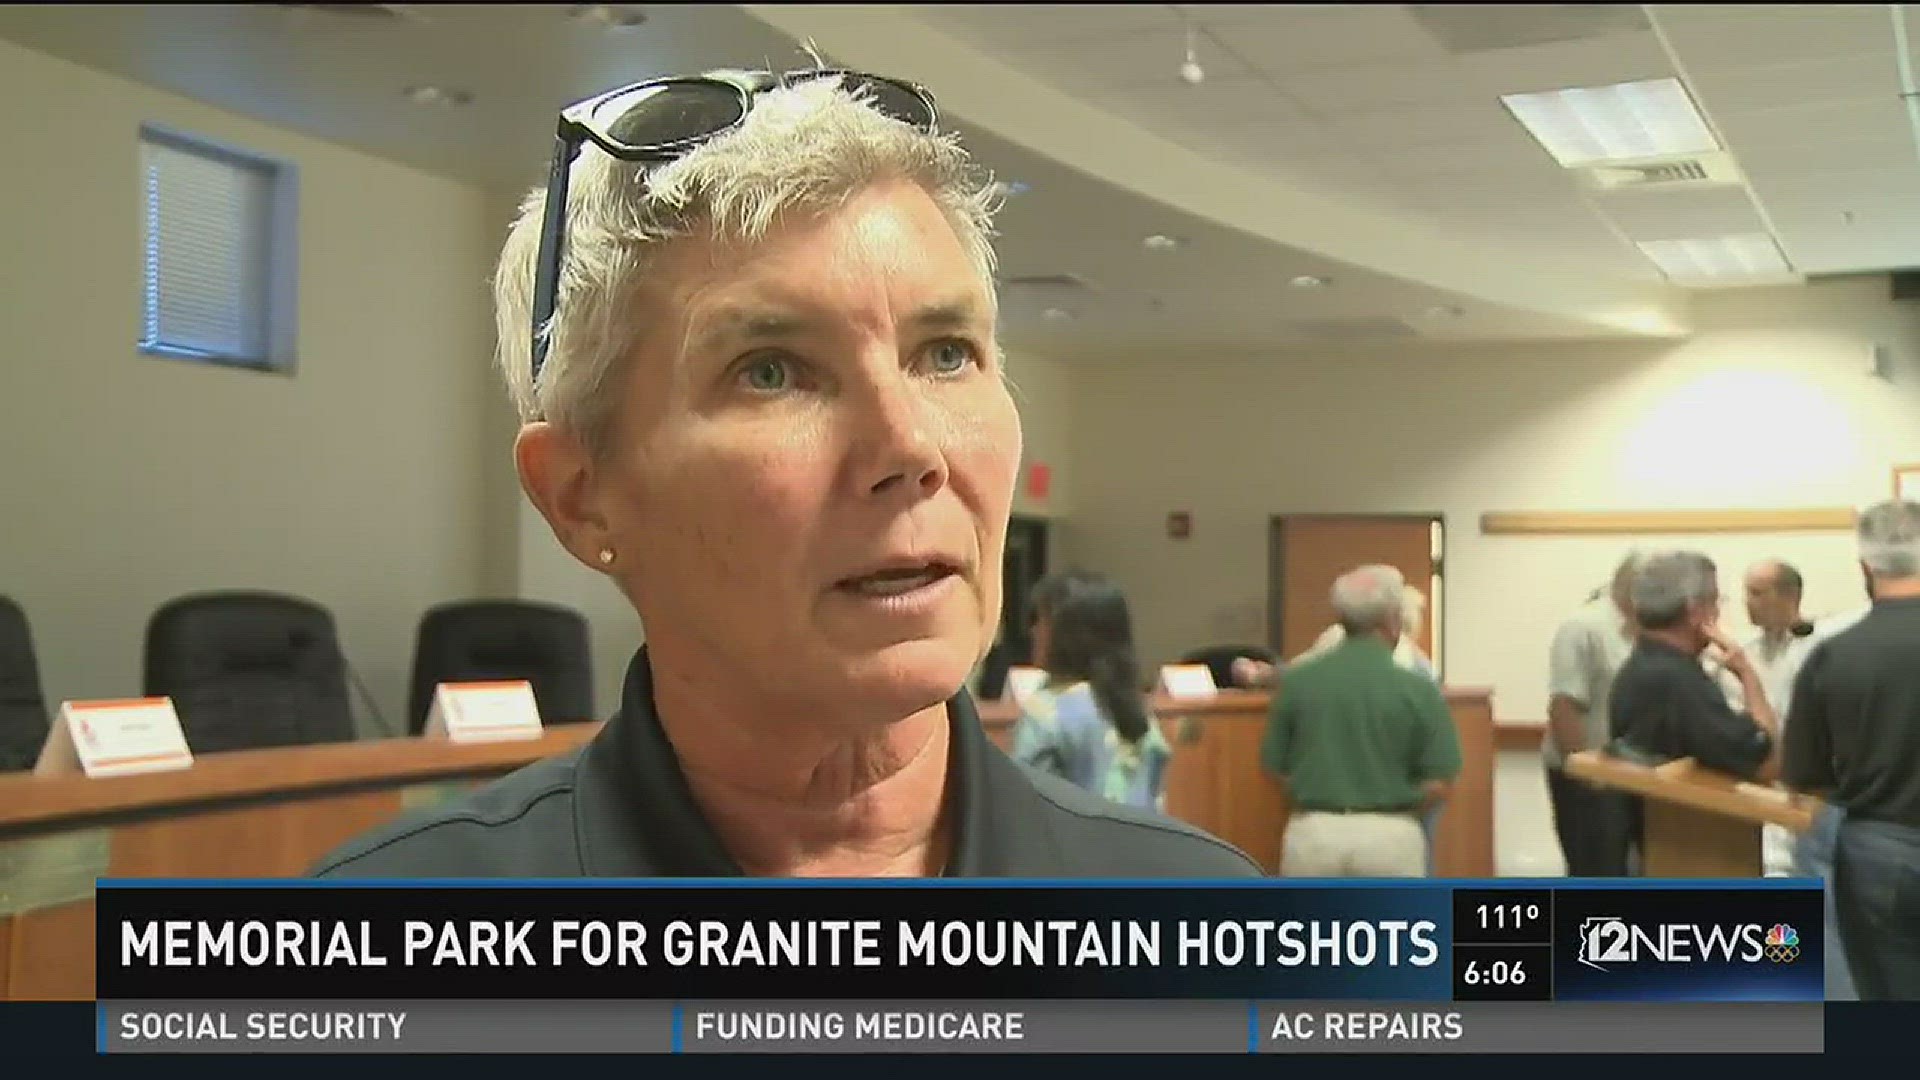 The park put together for the late granite mountain hotshots is nearing completion.